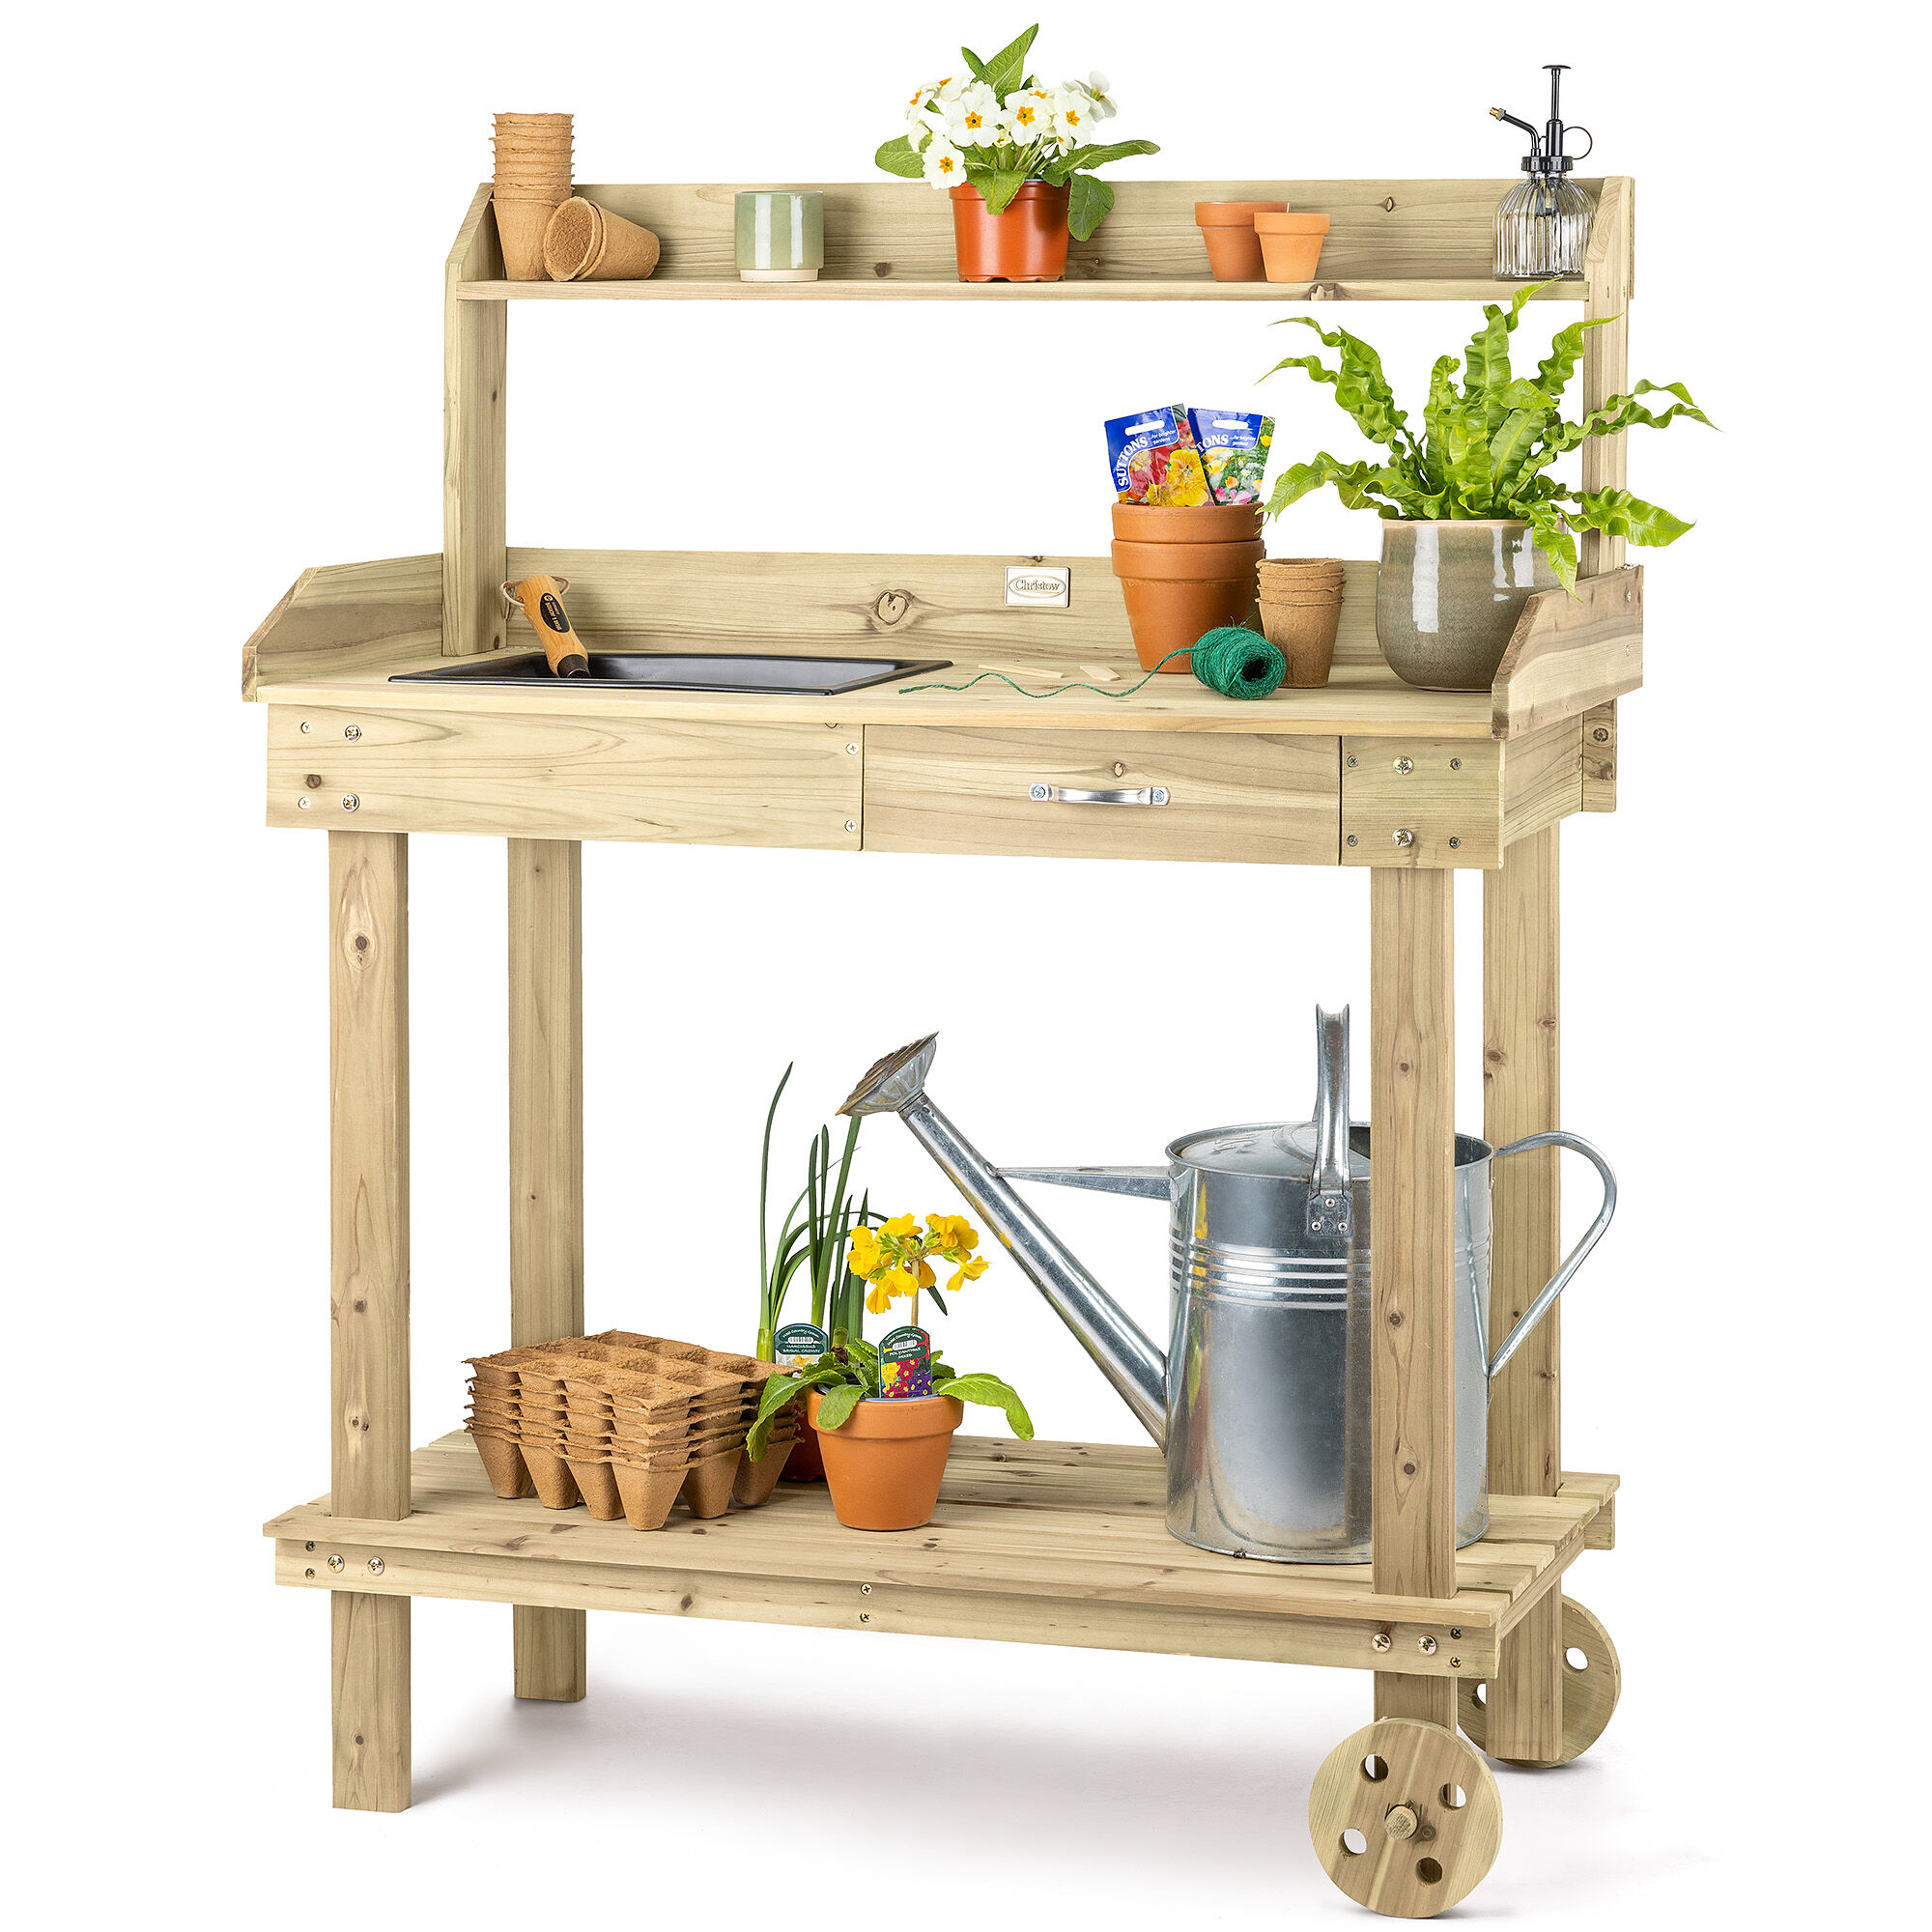 Christow Wooden Potting Table With Wheels - Natural Wood